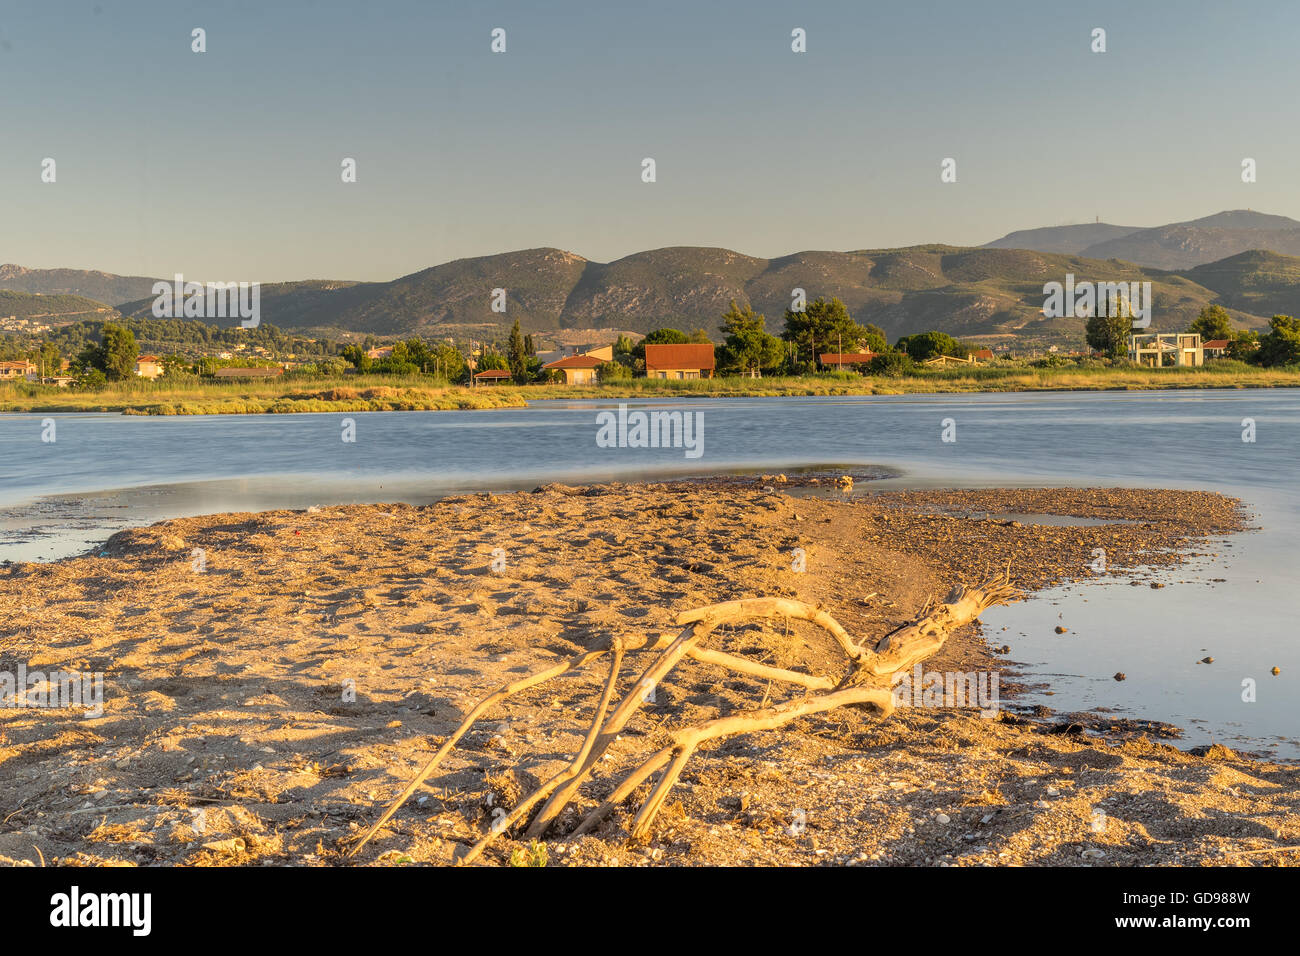 Beautiful scenery at the wetland of Oropos in Greece with traditional old and colorful houses against the lake. Stock Photo